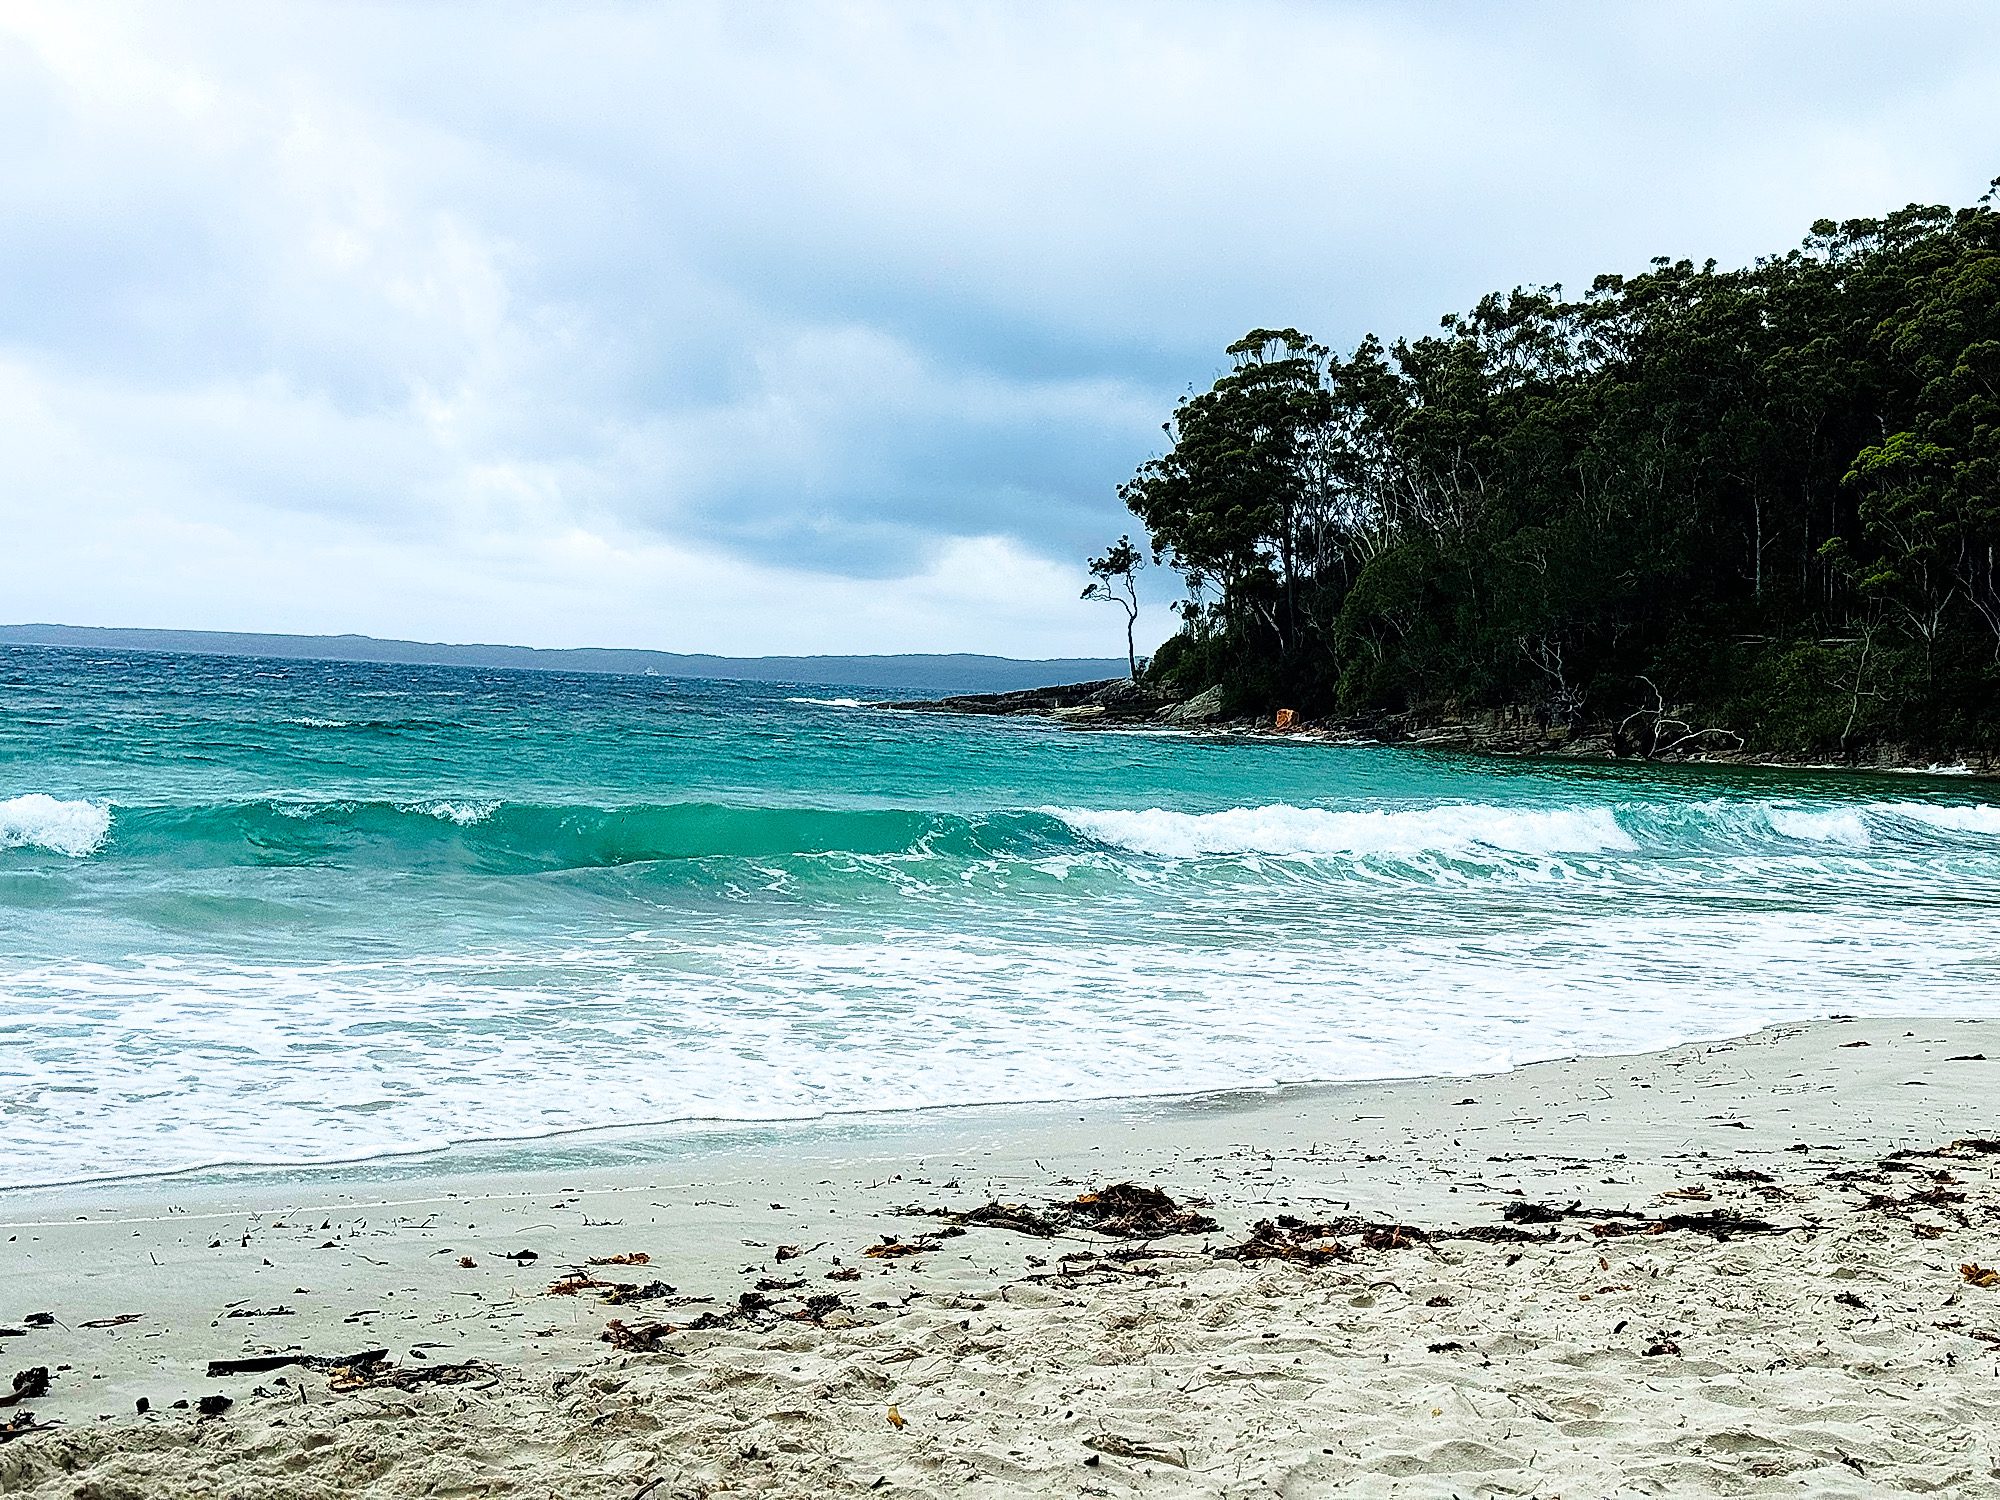 Jervis bay day tour